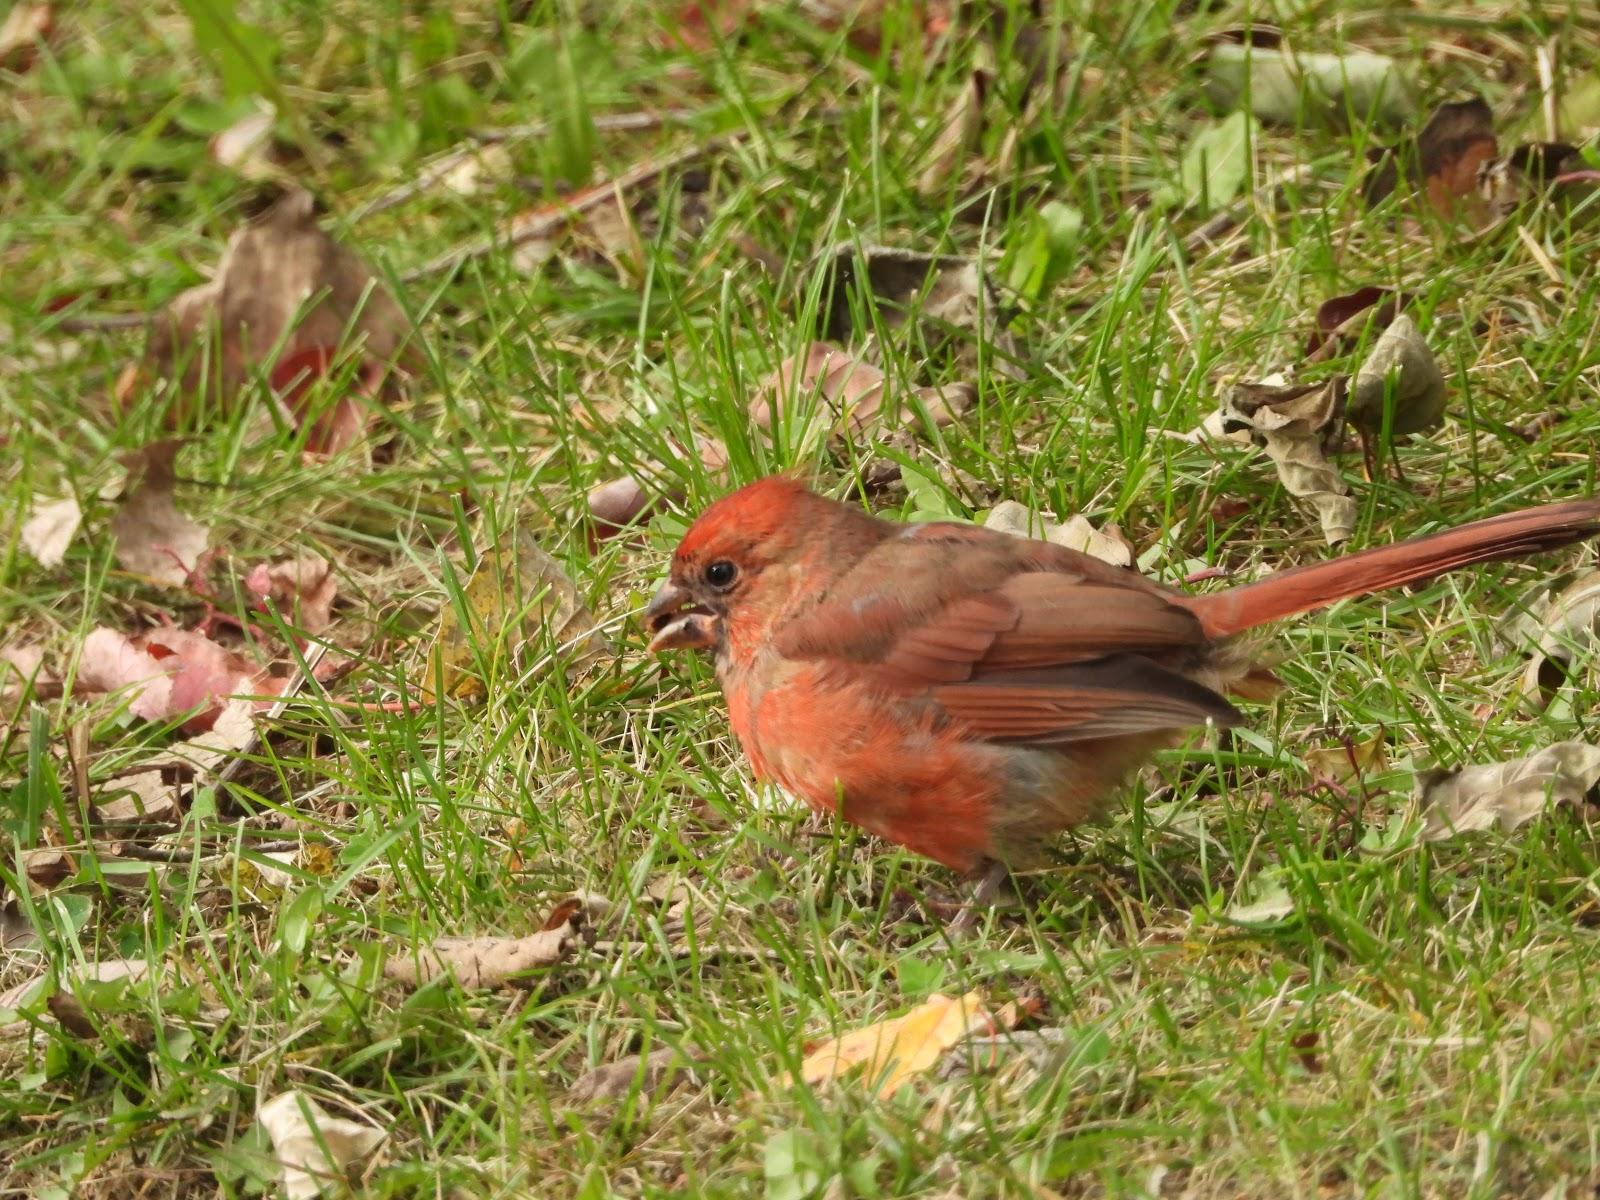 JUVENILE NORTHERN CARDINAL MOLTING TO ADULT, COLONEL